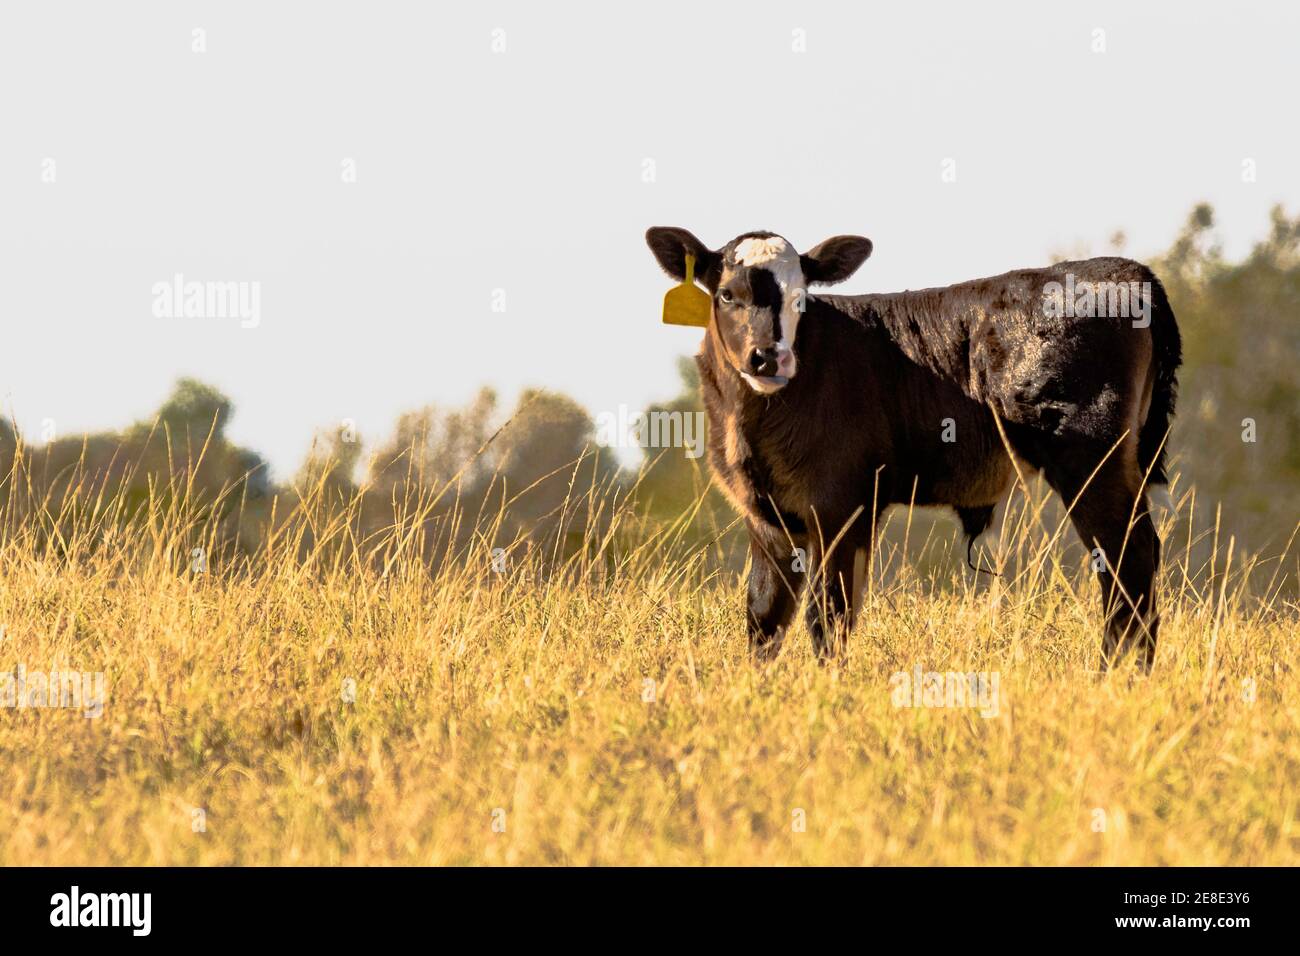 Black Angus crossbred calf in a field of tall brown grass Stock Photo